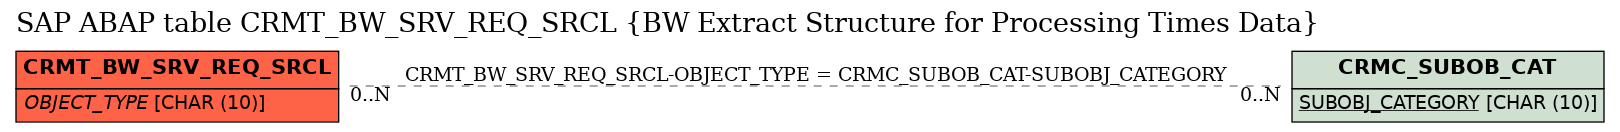 E-R Diagram for table CRMT_BW_SRV_REQ_SRCL (BW Extract Structure for Processing Times Data)